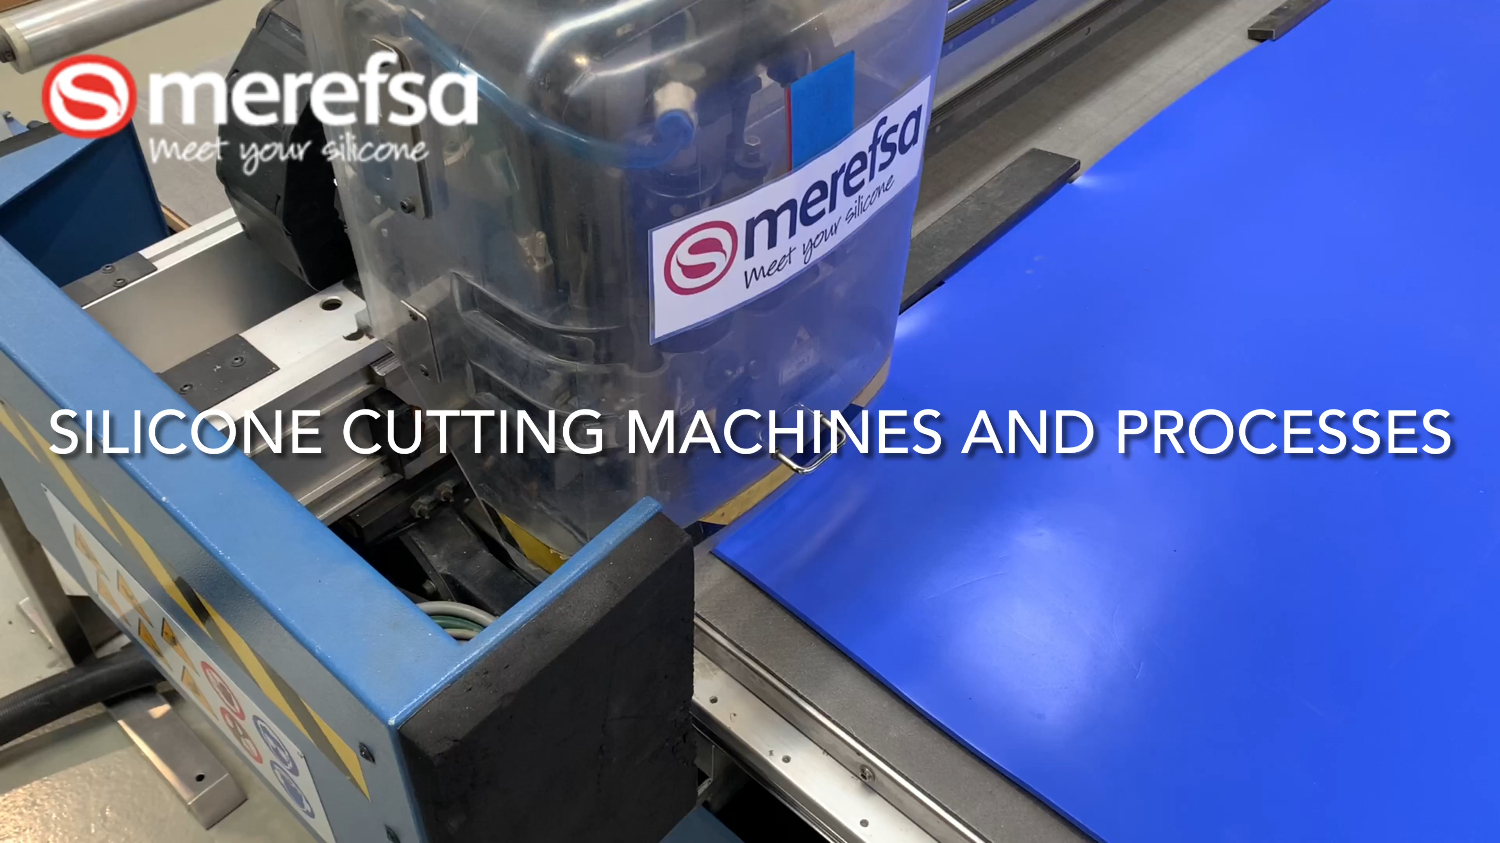 Silicone cutting machines and processes 